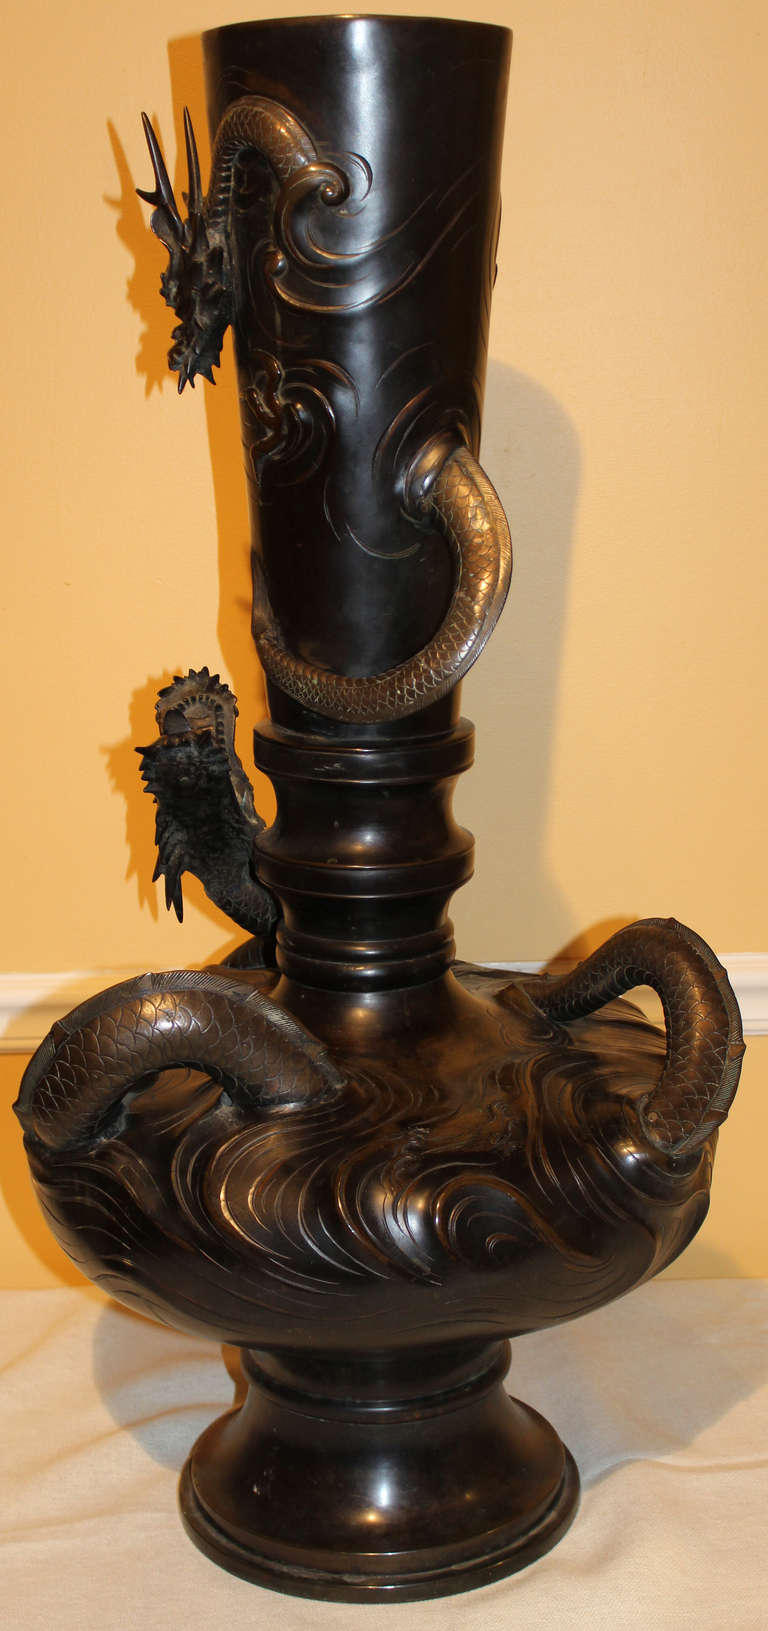 This spectacular form bronze vase features detailed dragon decoration wrapped around the body of the vase, showing the dragon slipping above and below the surface. Great patina and surface color.